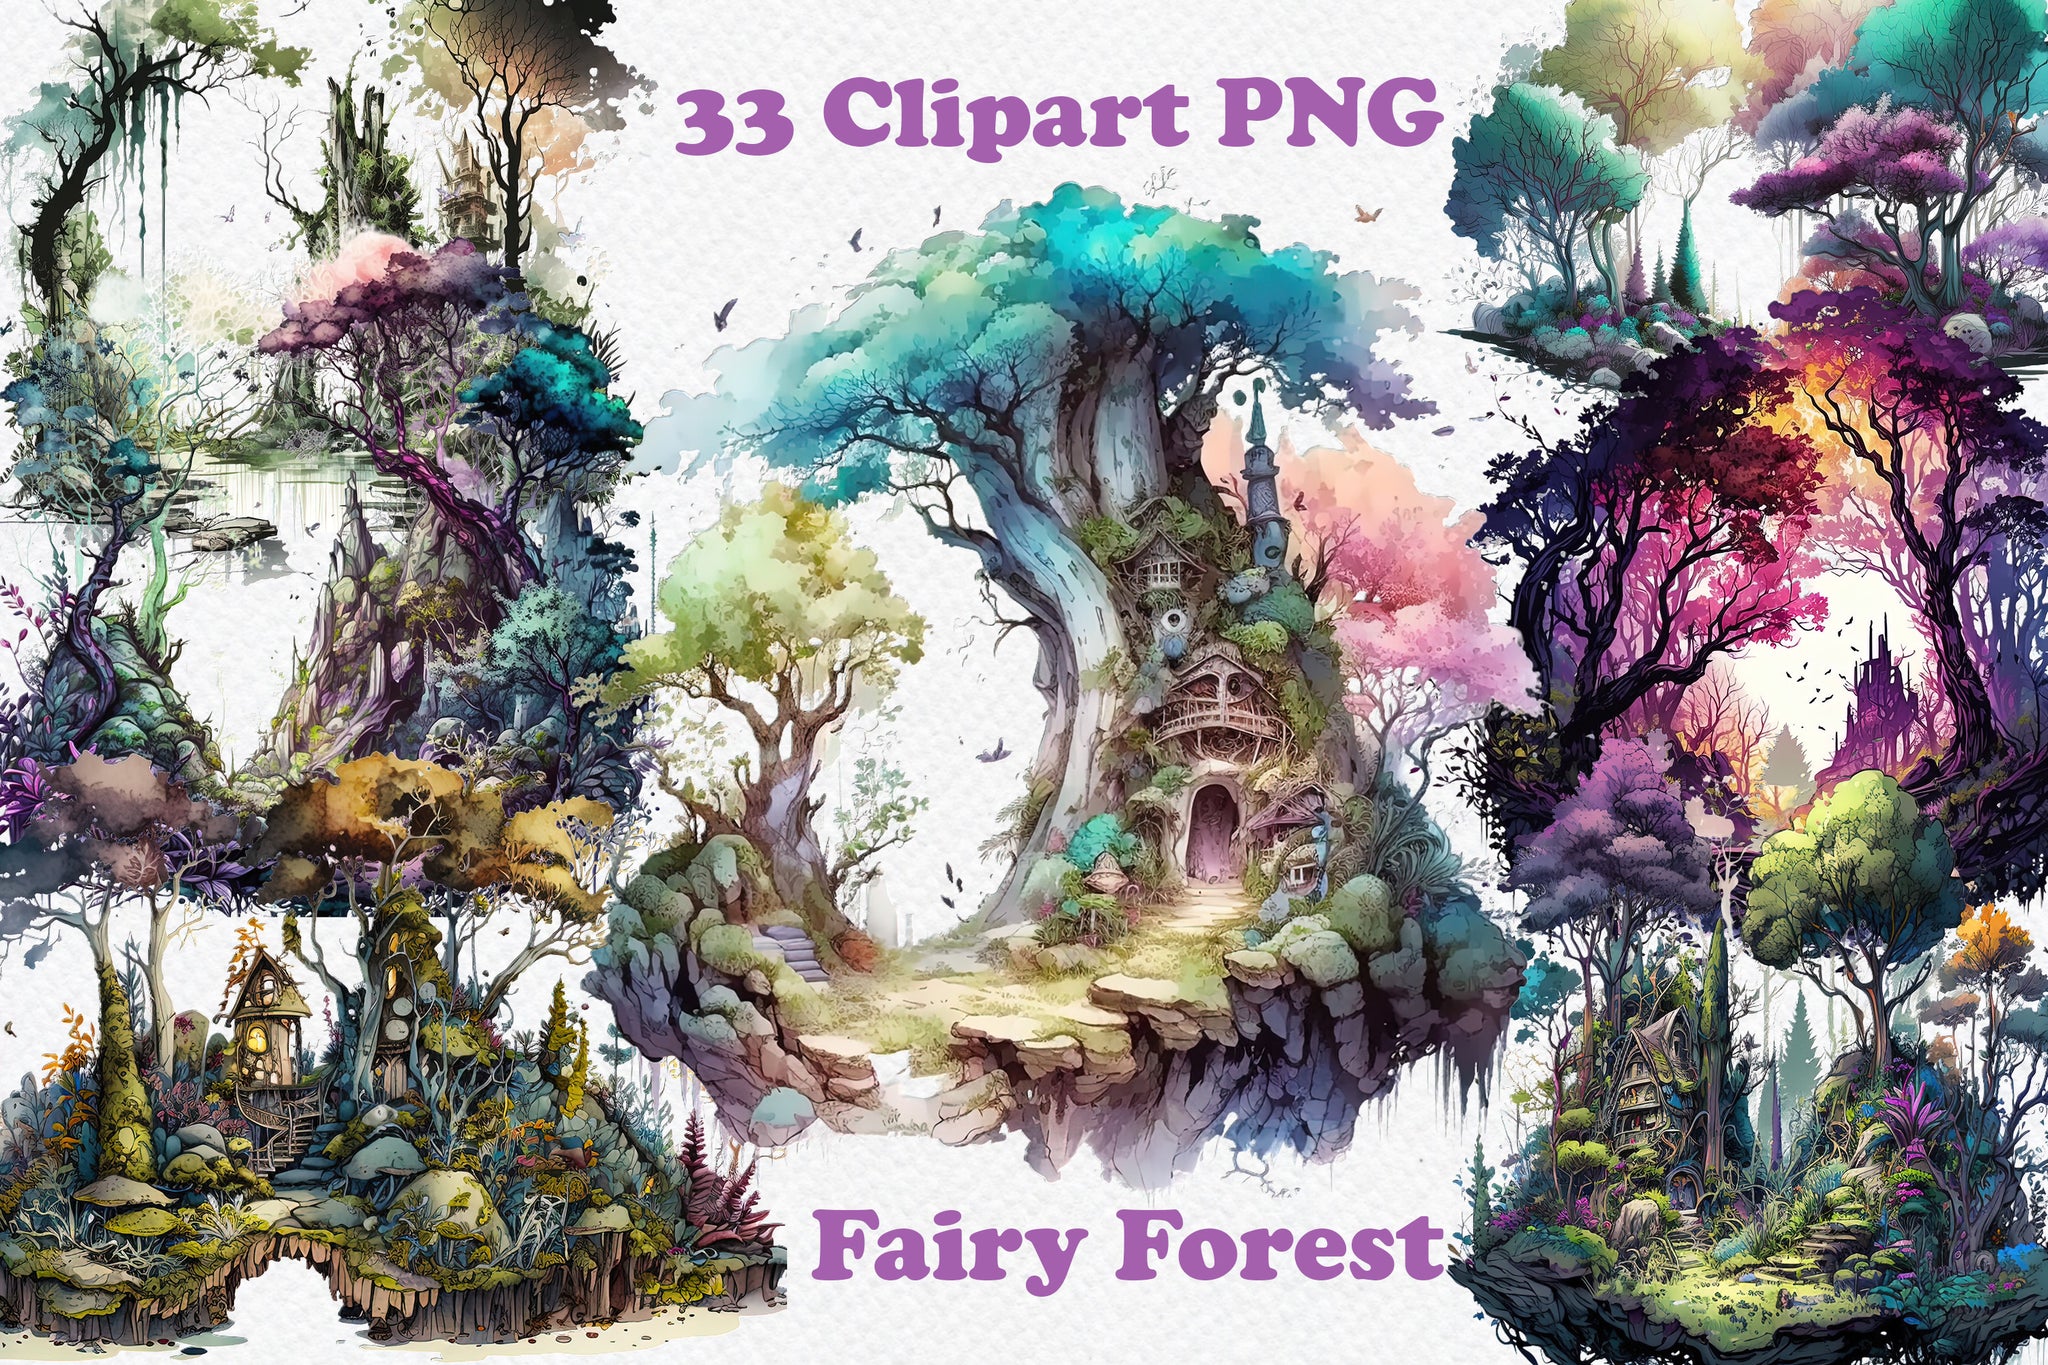 Fairy forest clipart, png. Digital watercolor. Free commercial use. Summer, magical forest, magic landscape, elf. Wonderland, fairyland.